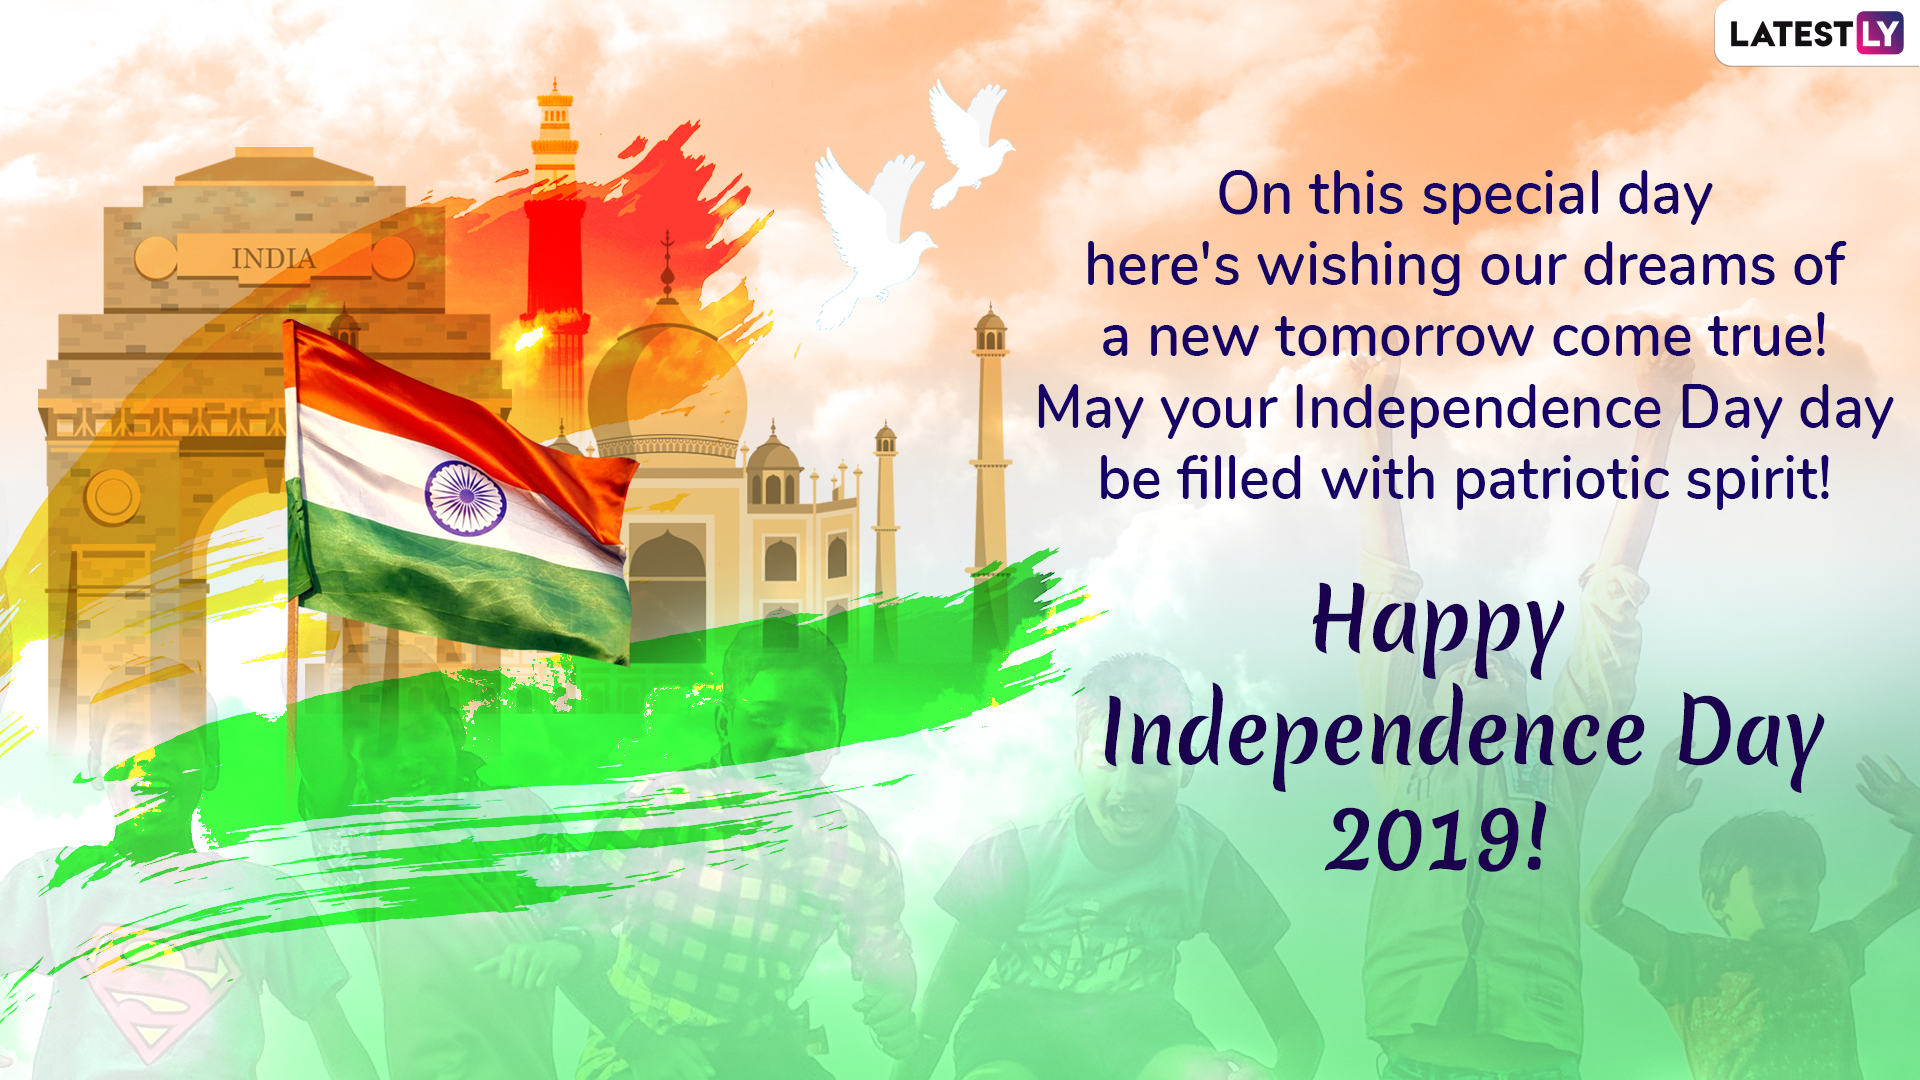 Independence Day Images greetings pictures and wishes to share - The State